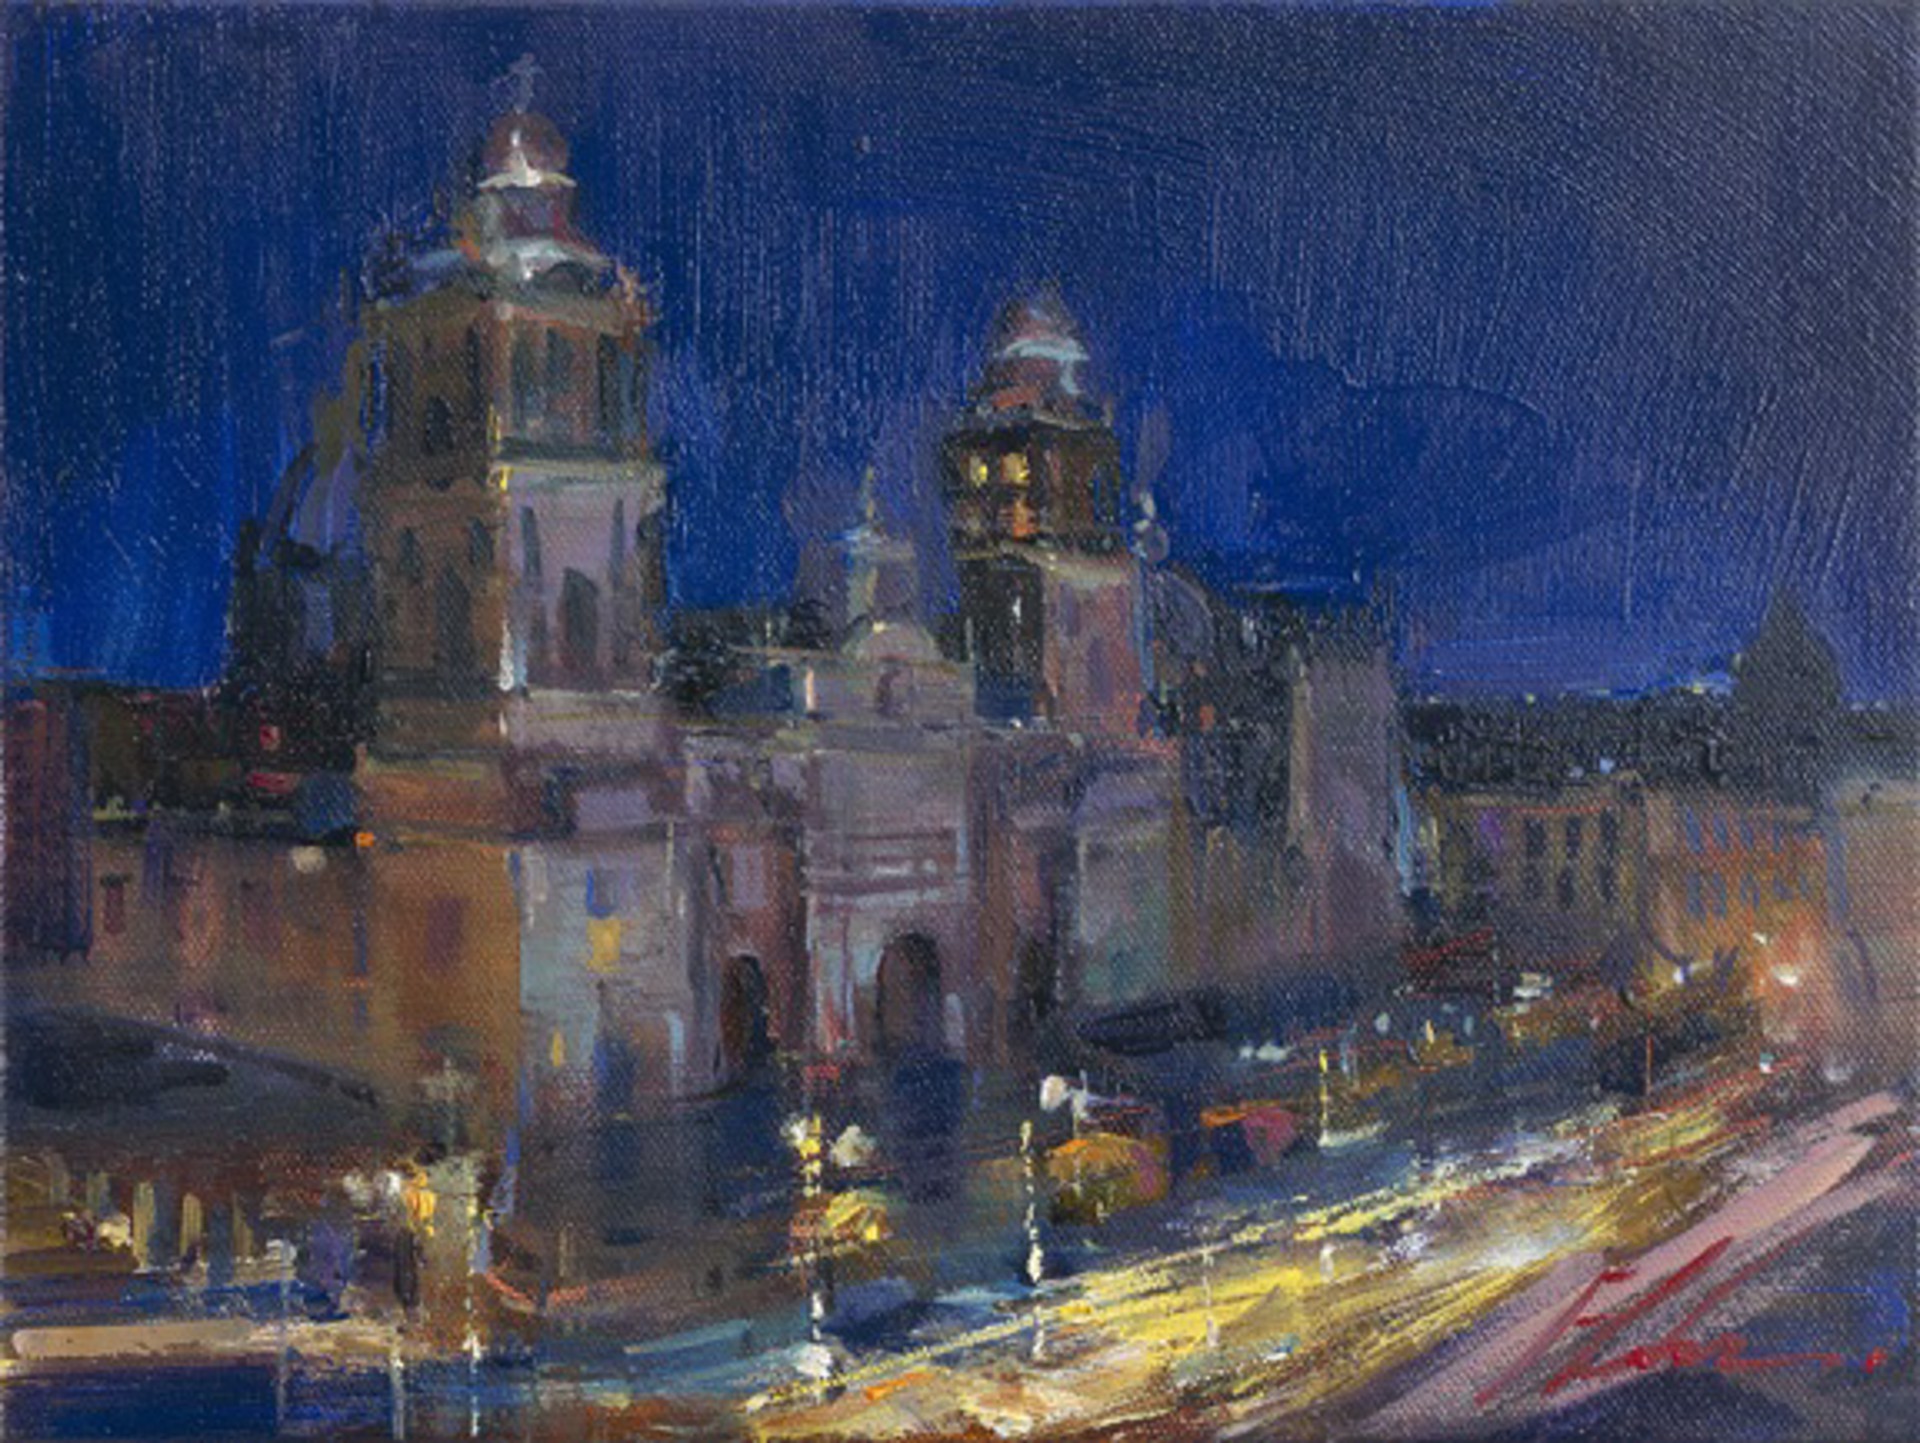 Metropolitan Cathedral, Mexico City Postcards From Around the World by Michael Flohr